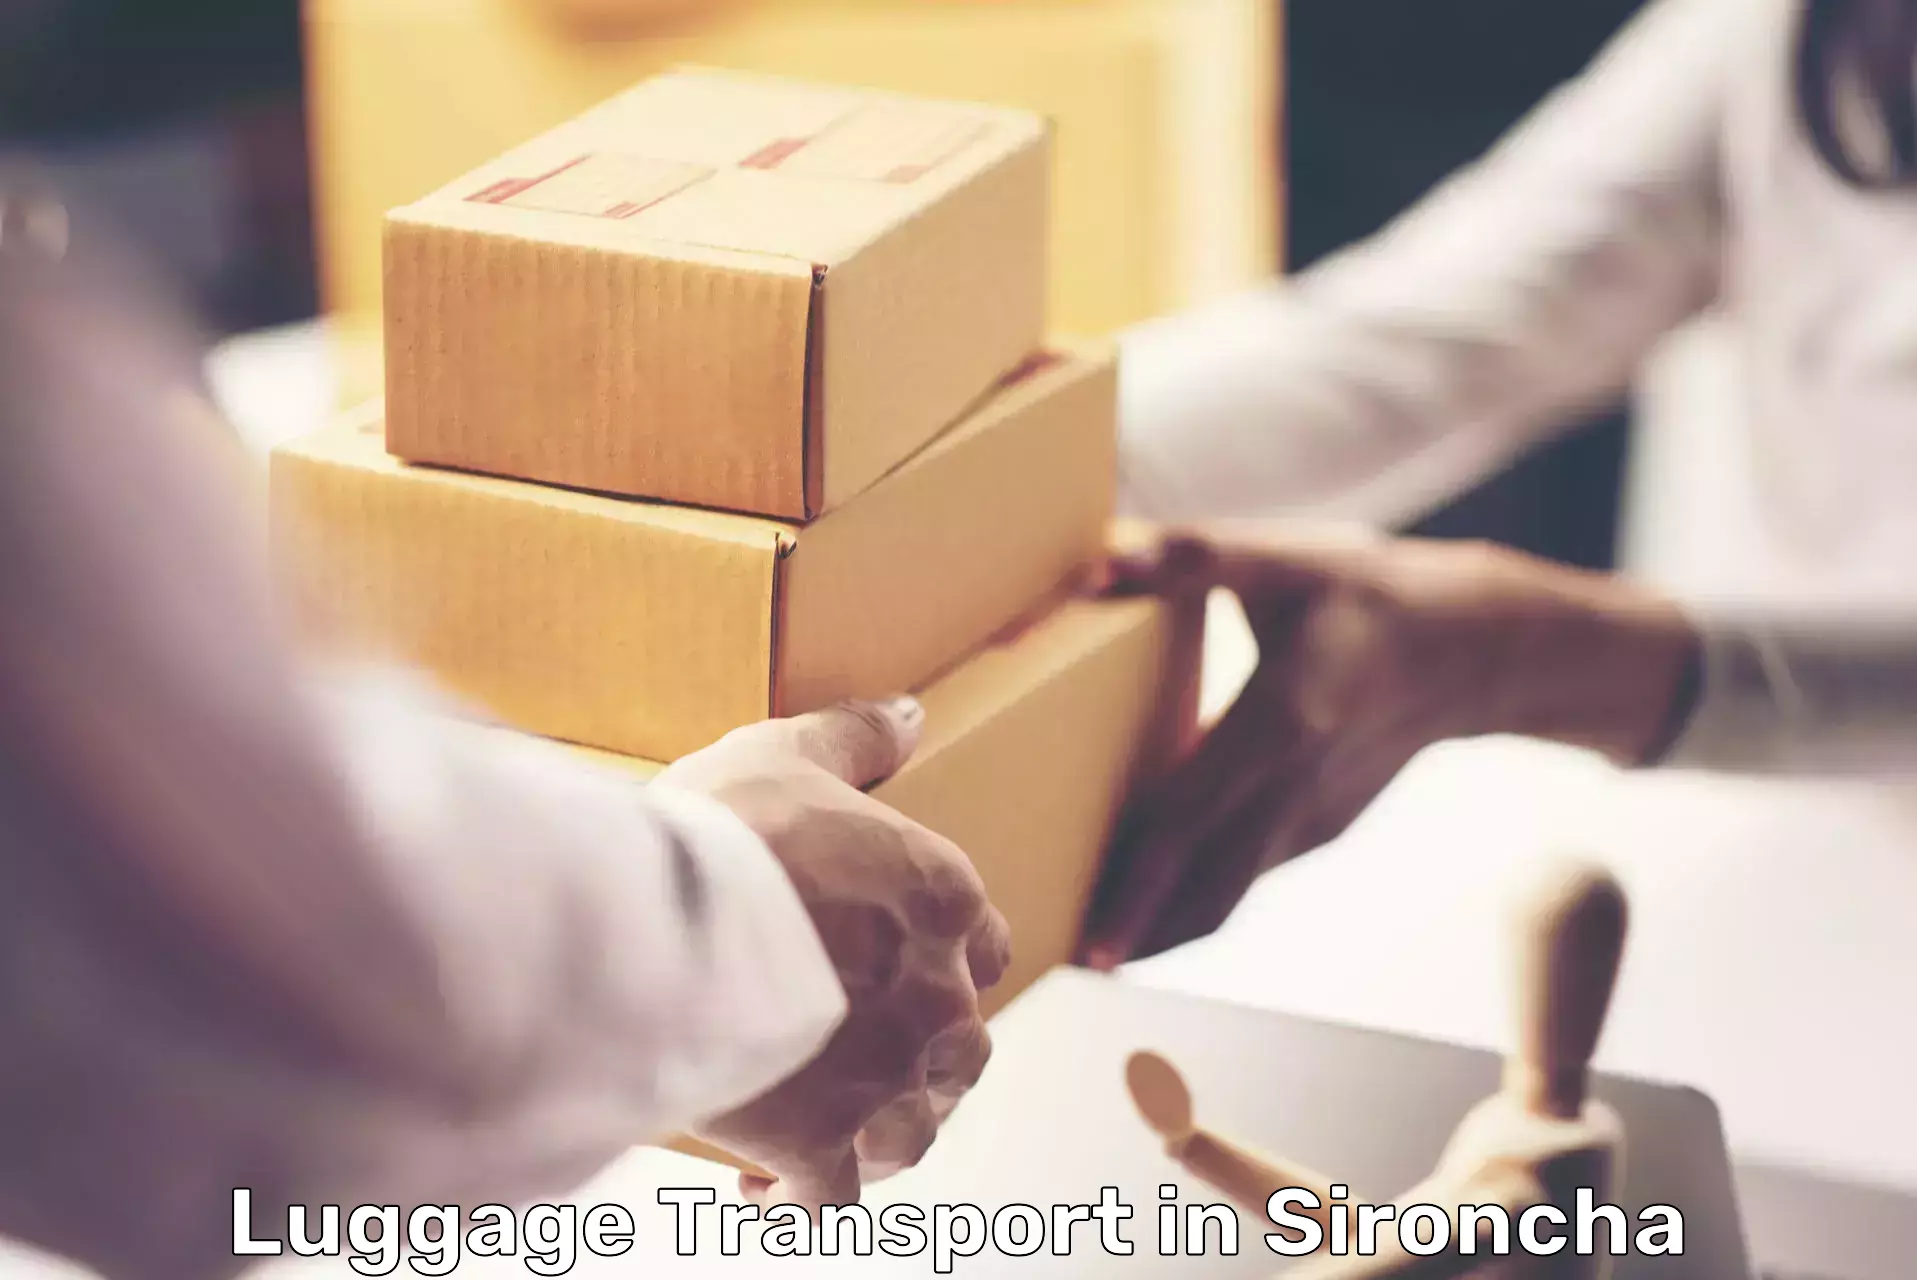 Luggage transport guidelines in Sironcha